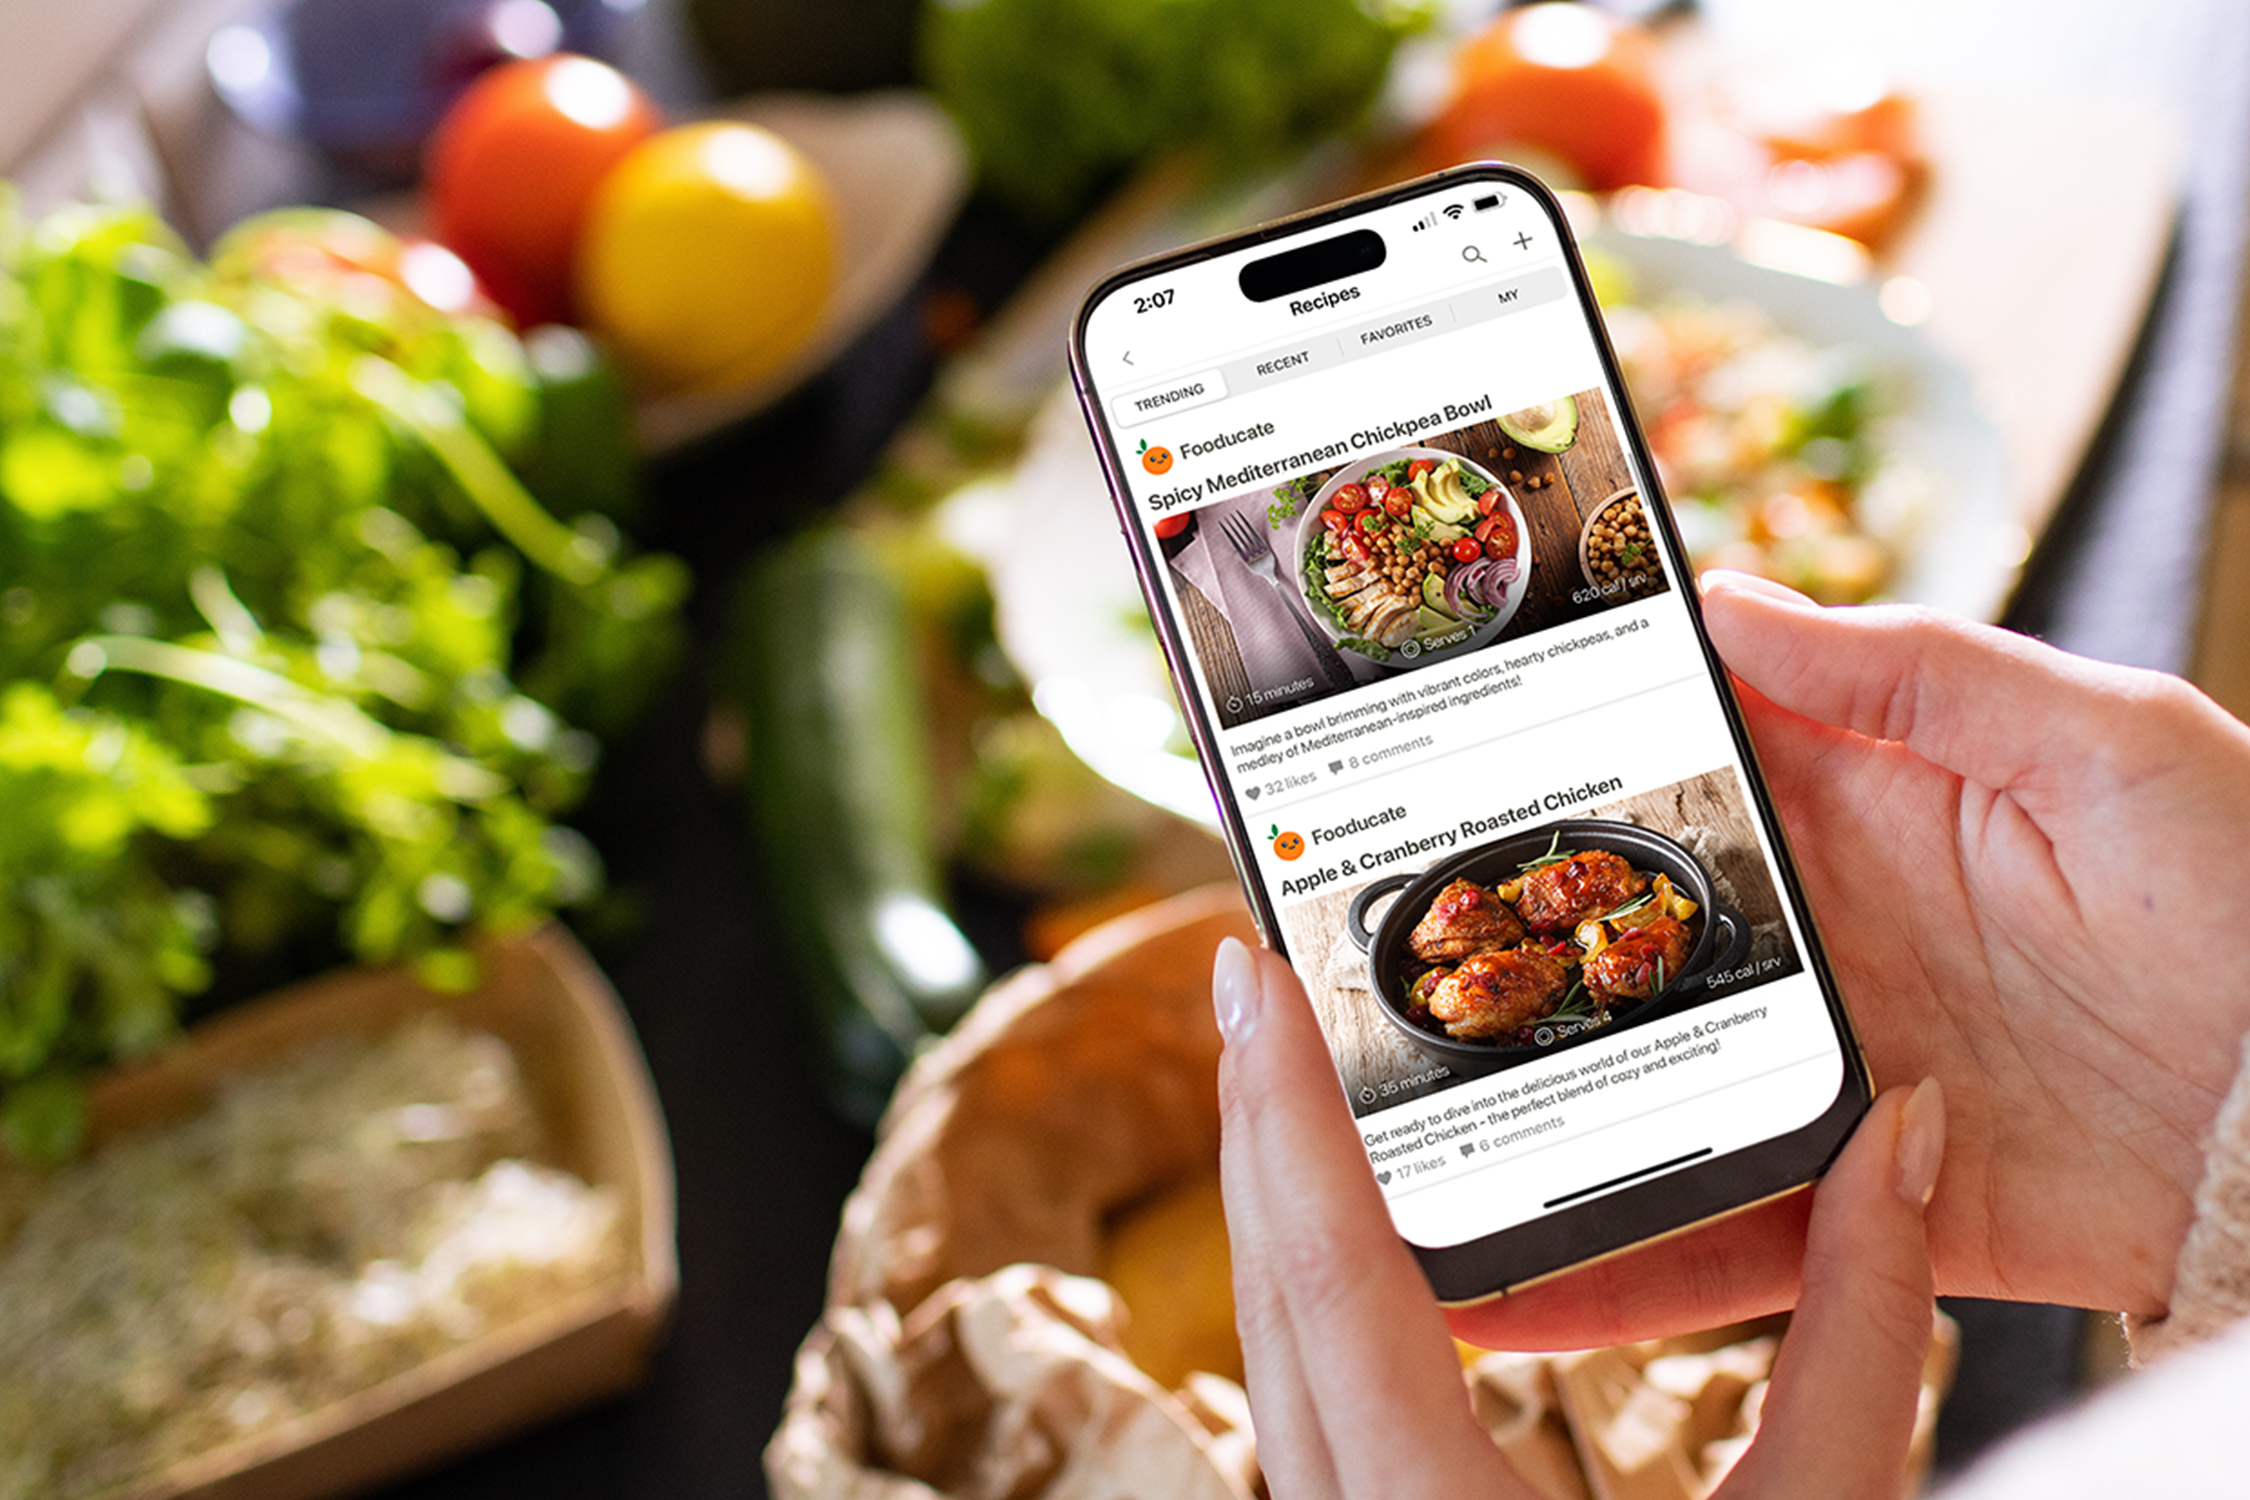 Drop some weight with $100 off this high-rated diet app